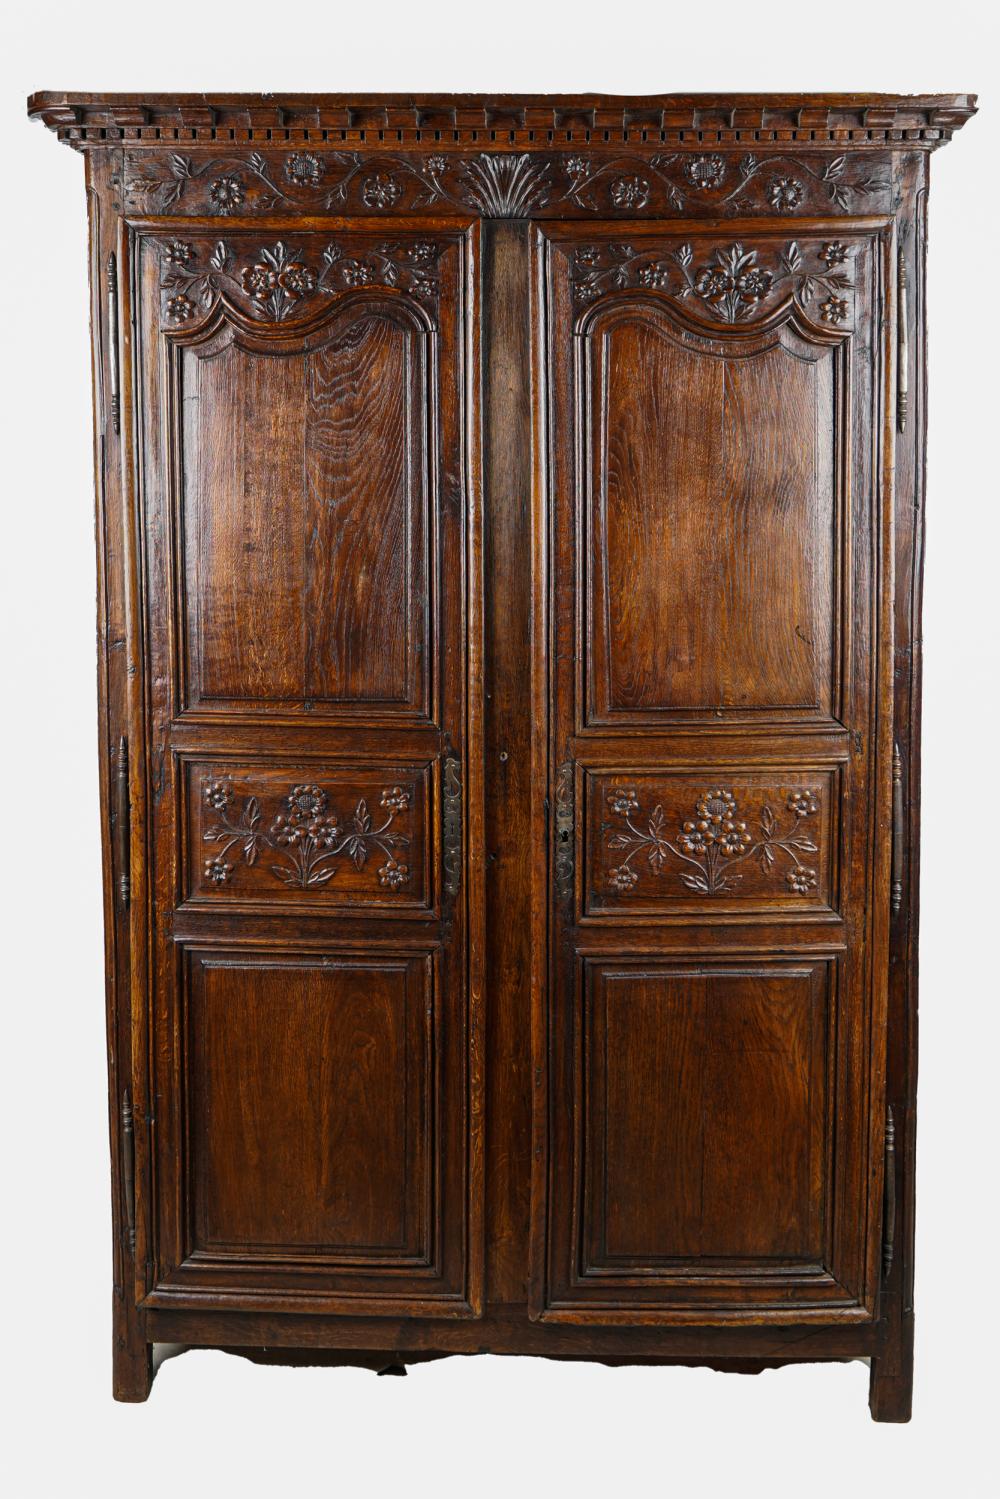 FRENCH PROVINCIALCARVED OAK ARMOIRElate